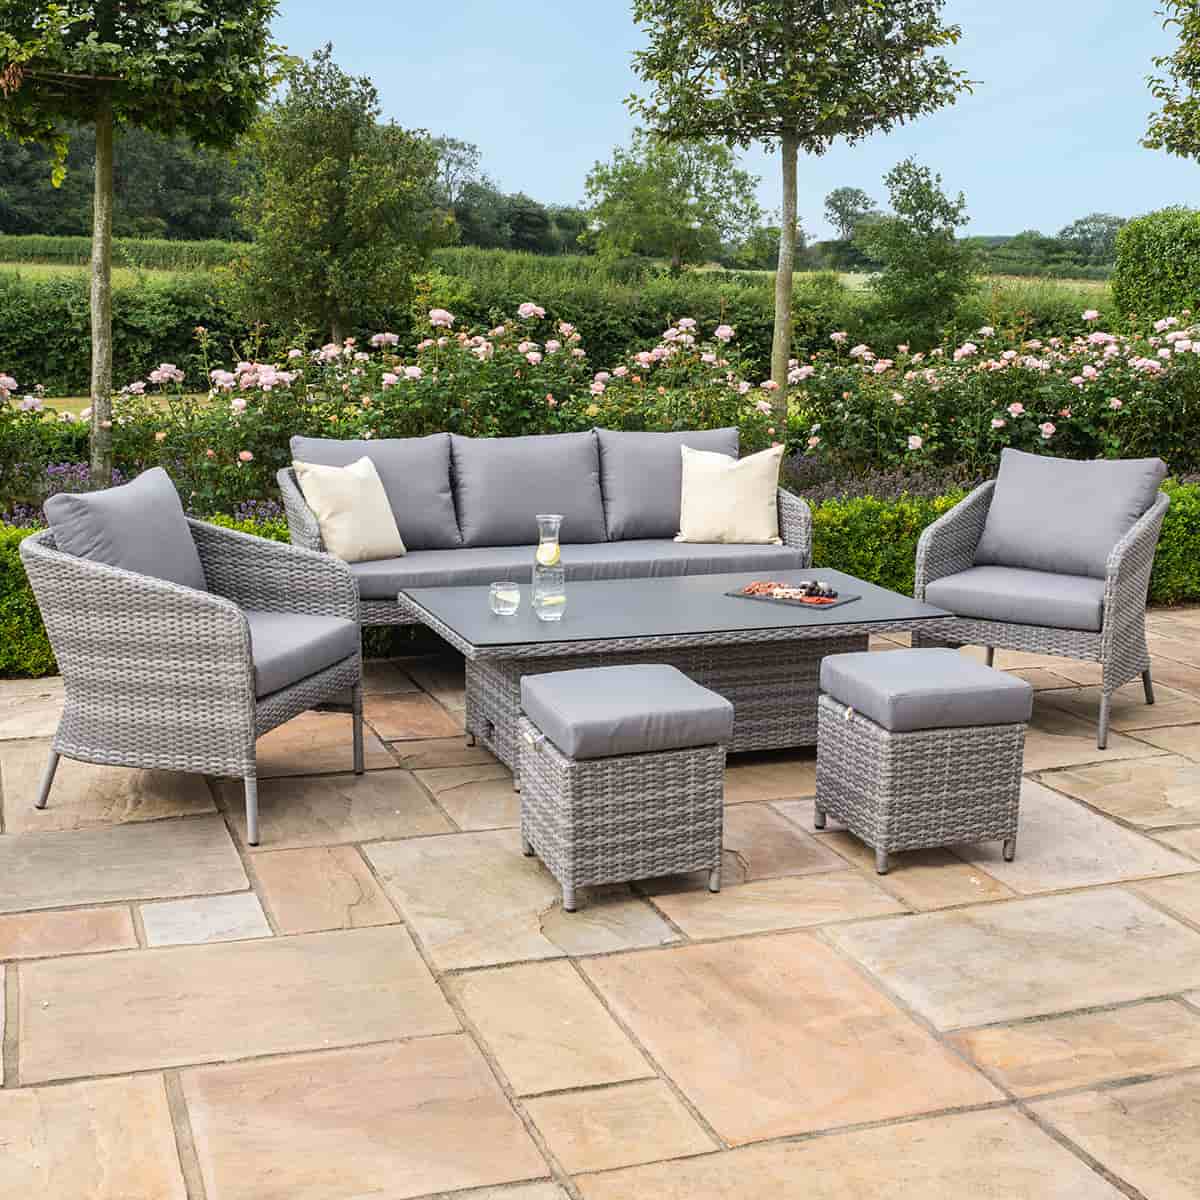 Grey rattan casual sofa dining set with rectangular rising table, two chairs and two stools